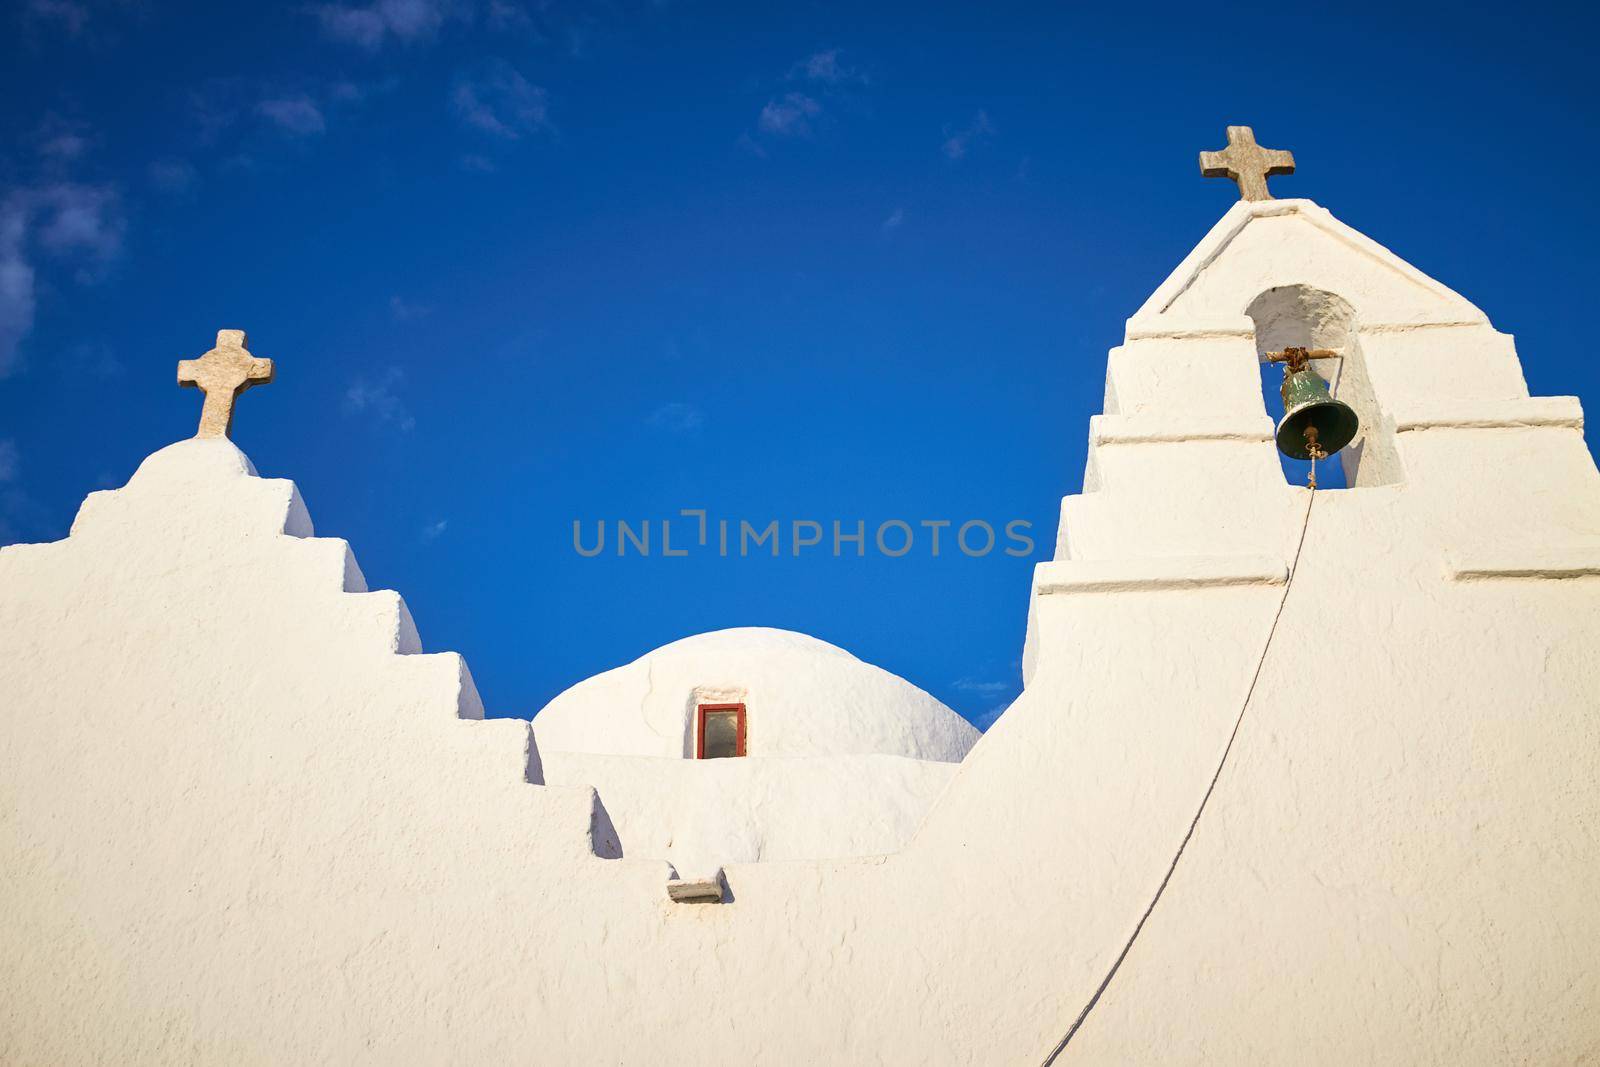 Old Paraportiani 14 century church - the most famous and popular place on the island Mykonos in Greece